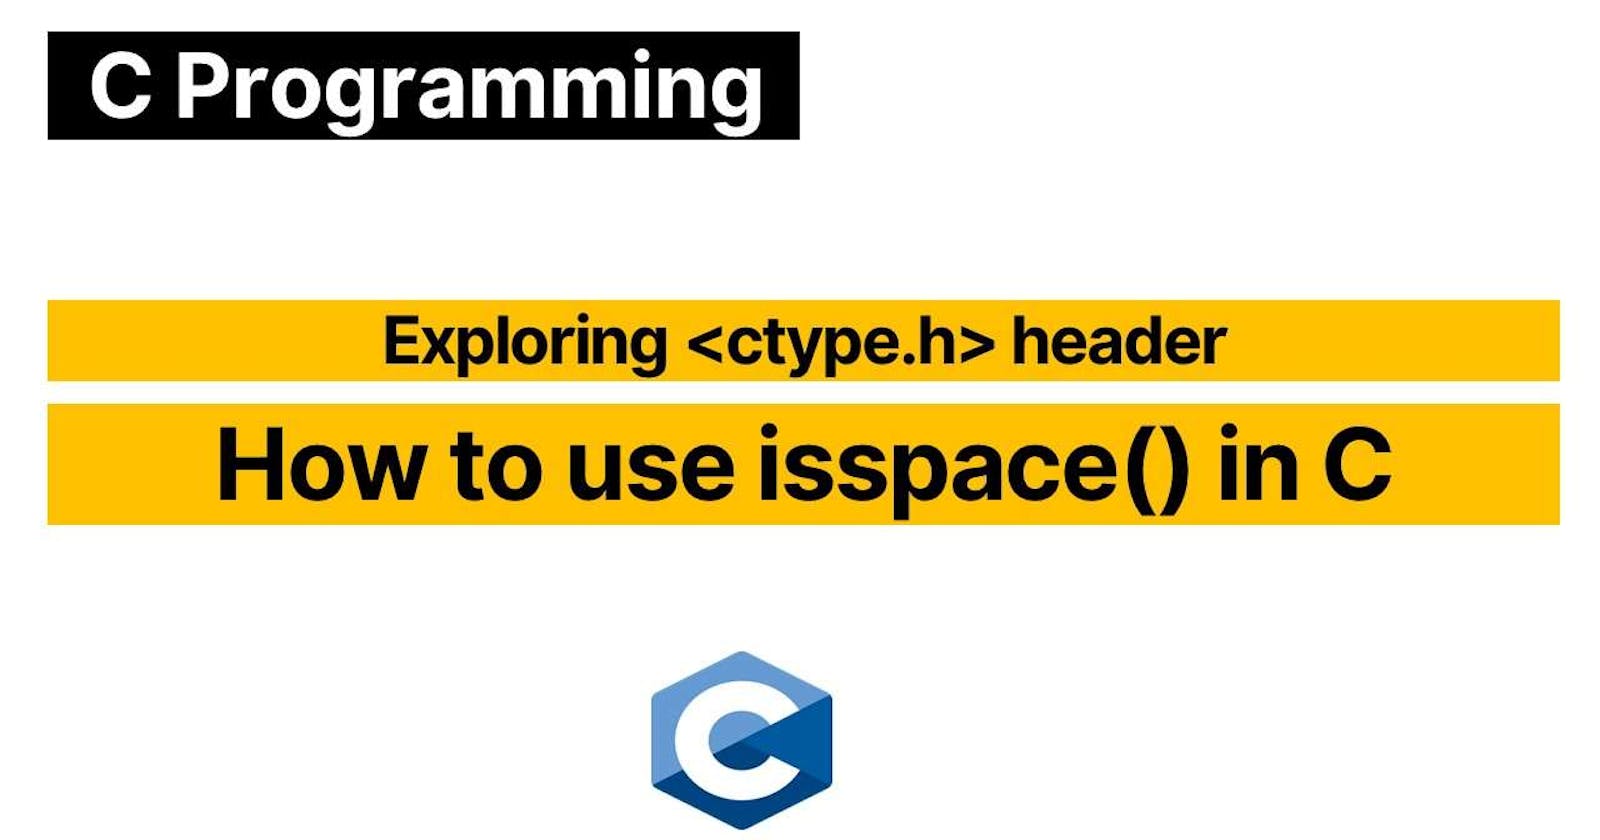 isspace() function in C